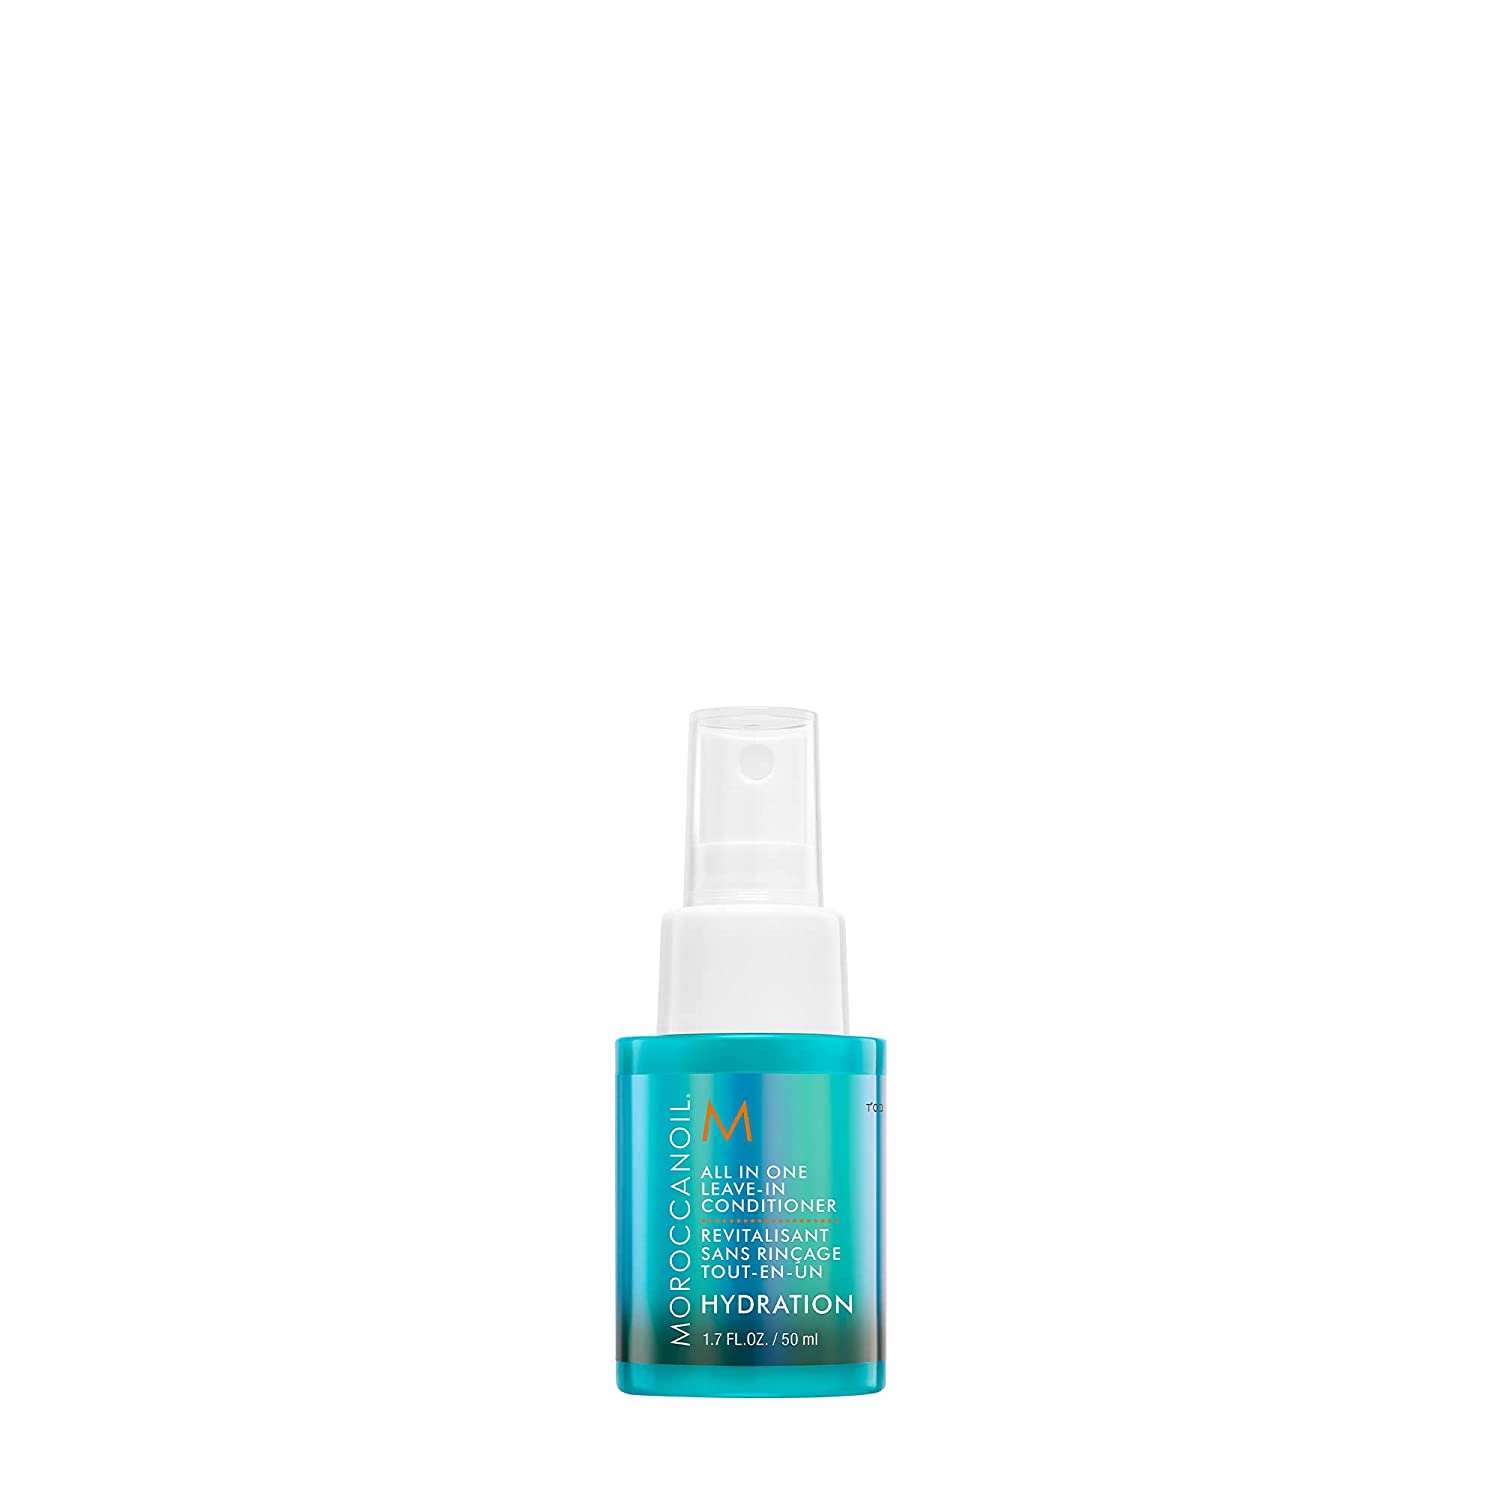 Moroccanoil all in one Leave in conditioner